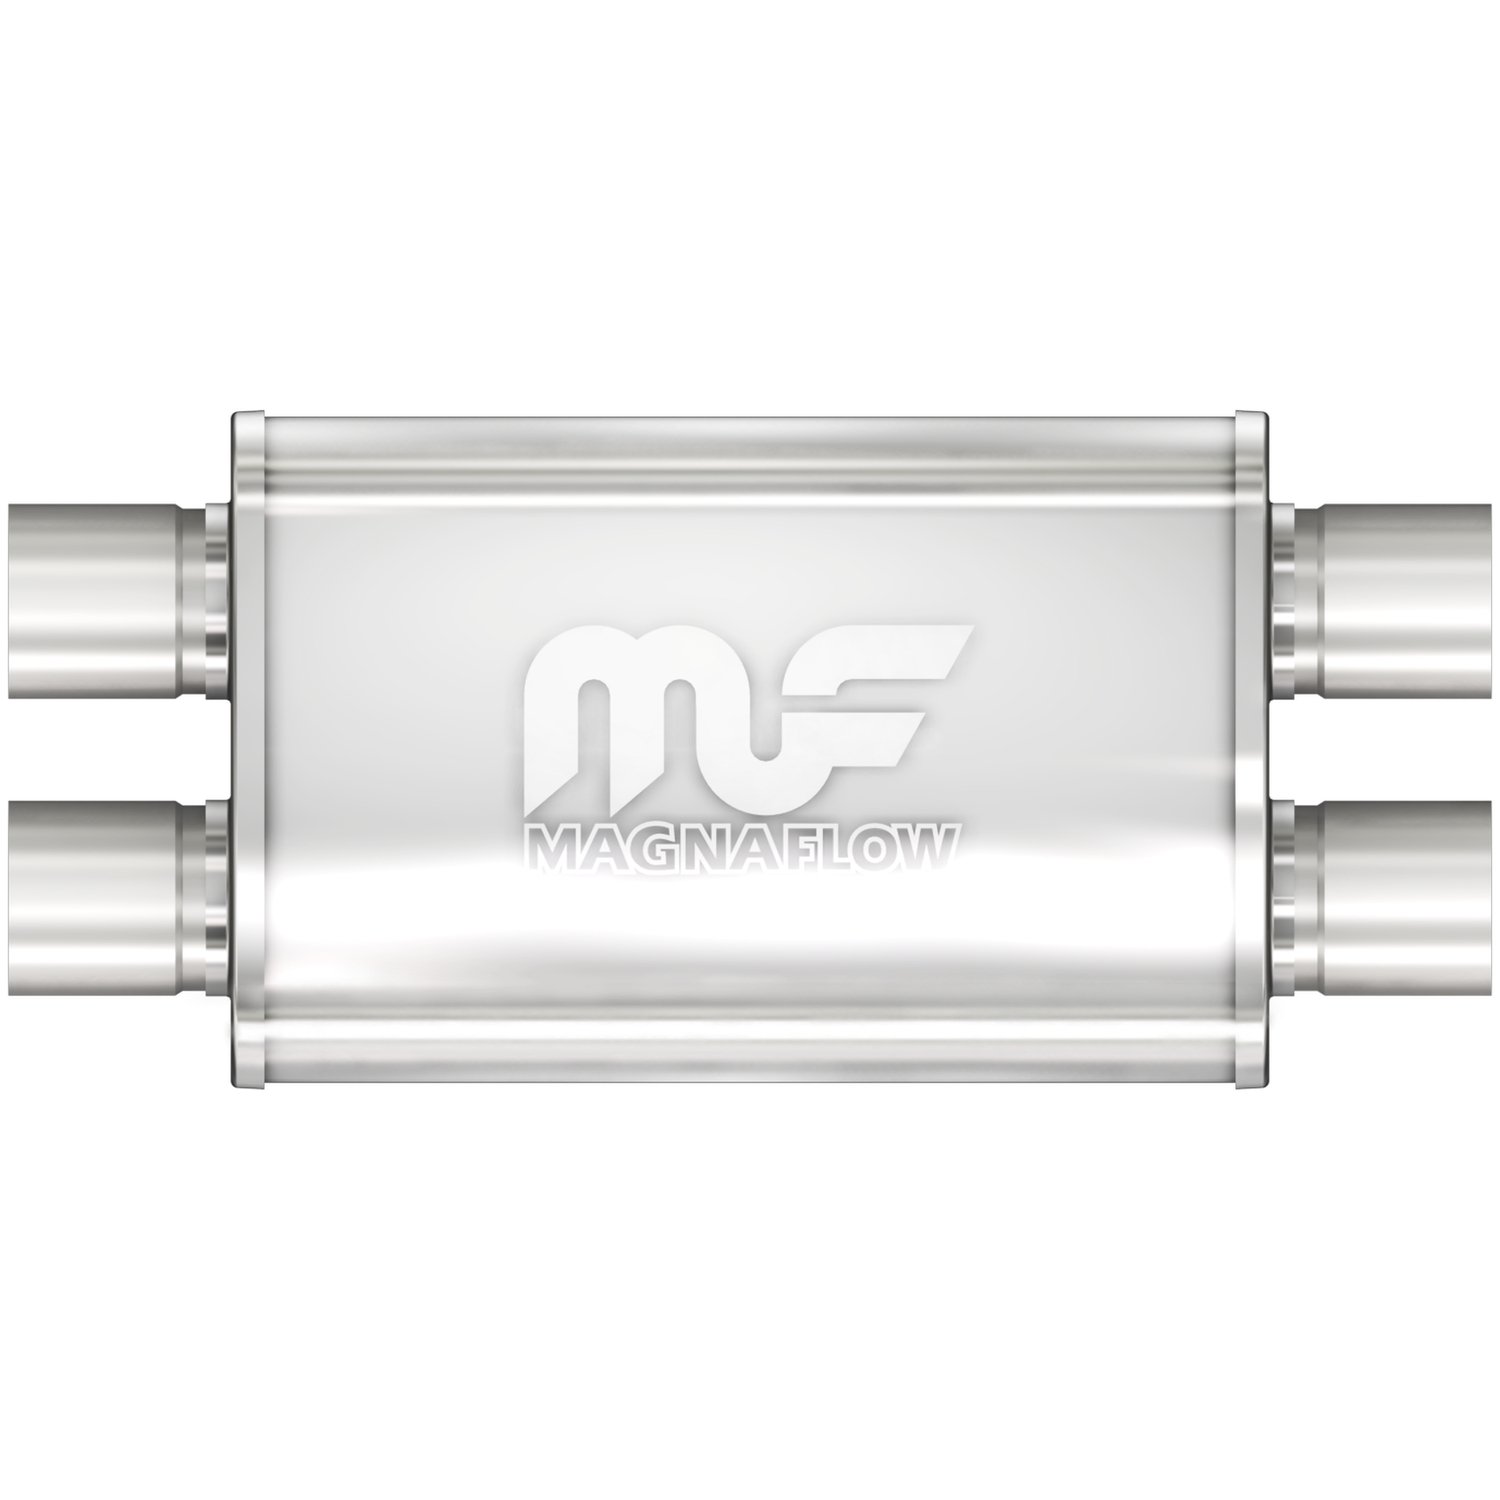 4" x 9" Oval Muffler Dual In/Dual Out: 2.25"/2.25" Body Length: 14" Overall Length: 20" Core Size: 2.5" Satin Finish